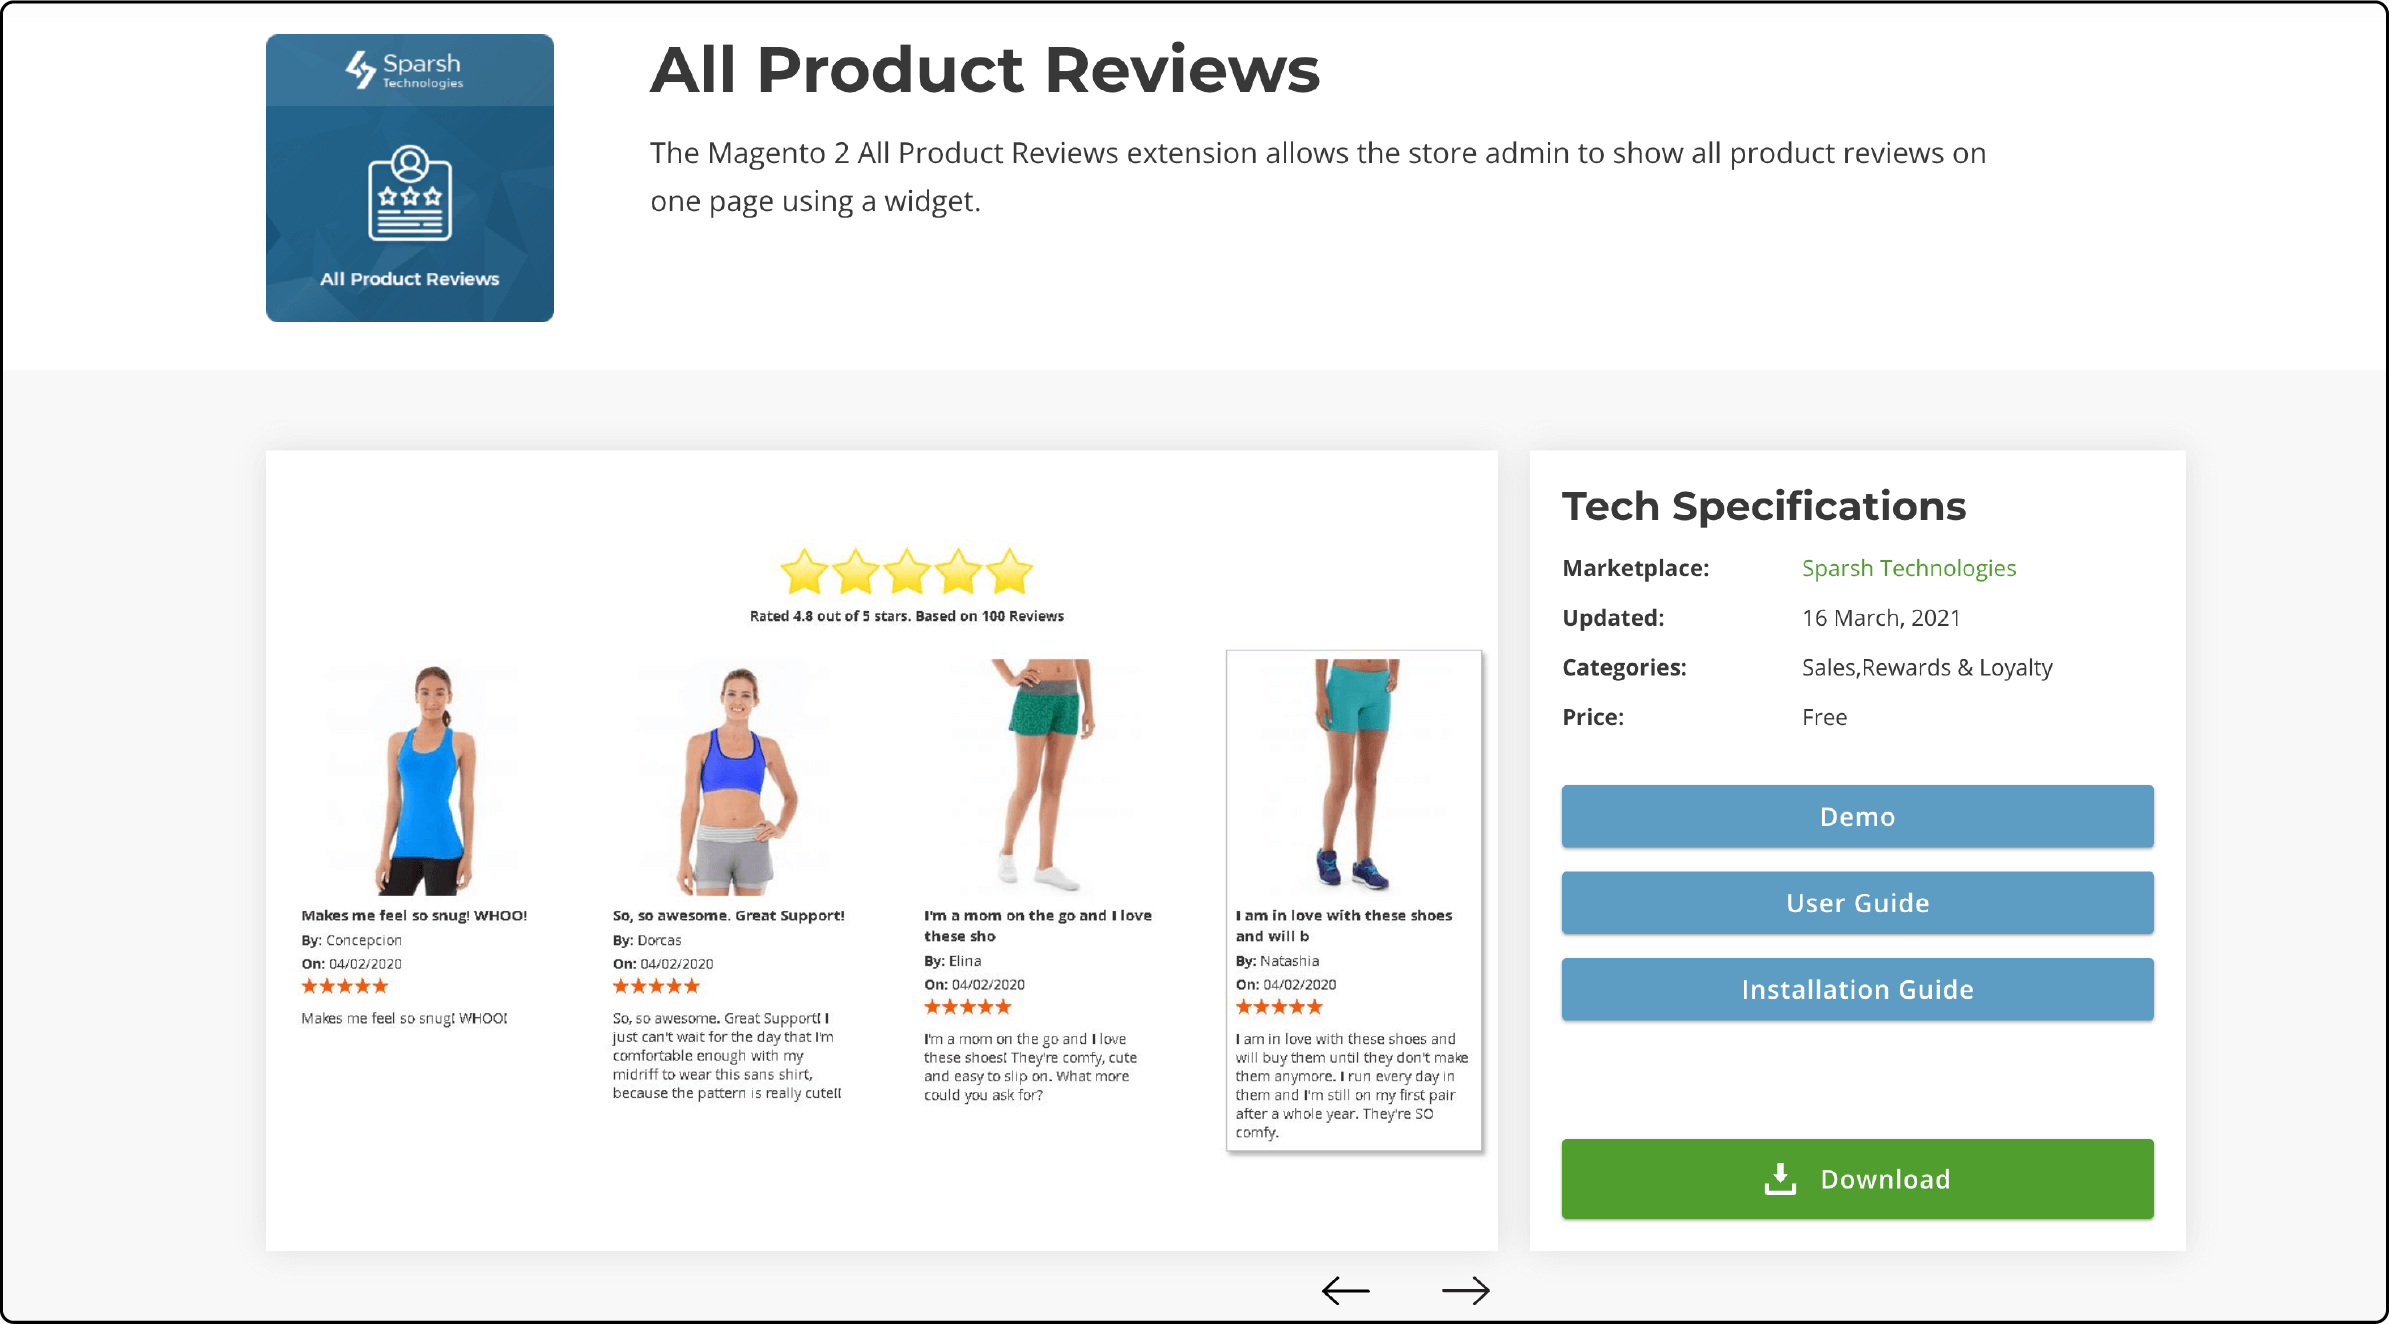 All Product Reviews extension by Sparsh Technologies for Magento 2